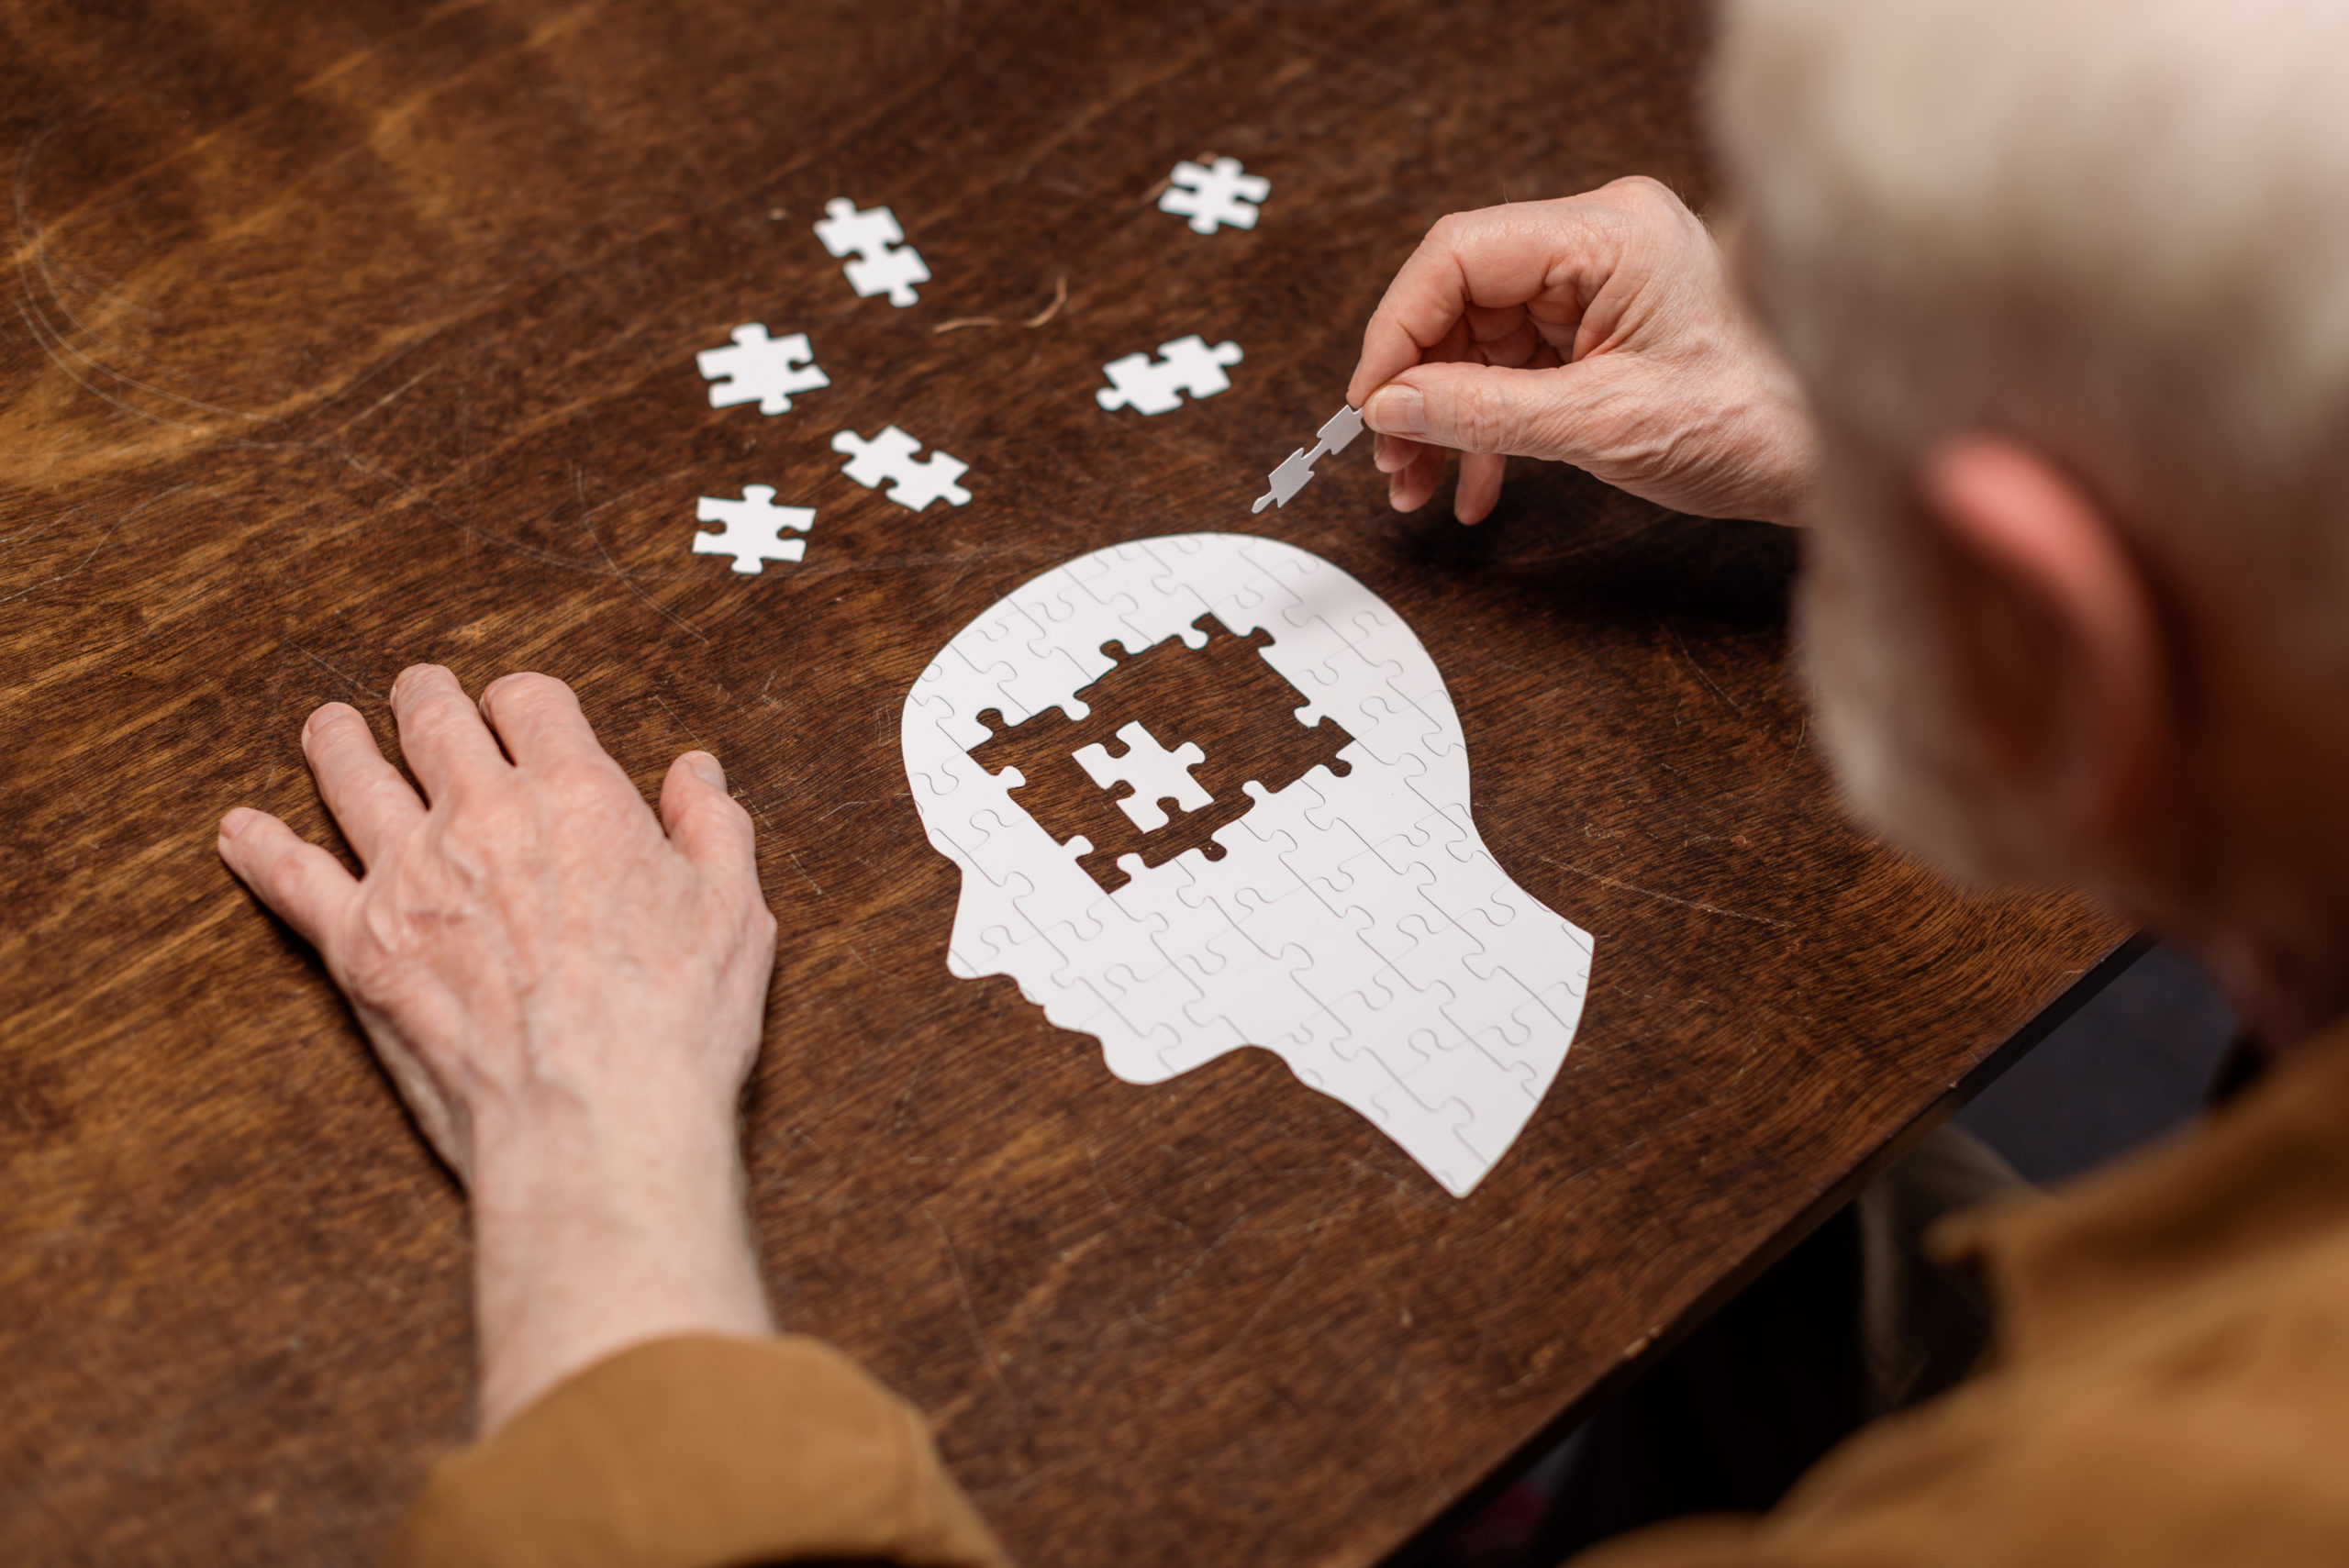 How to Care for a Loved One with Dementia